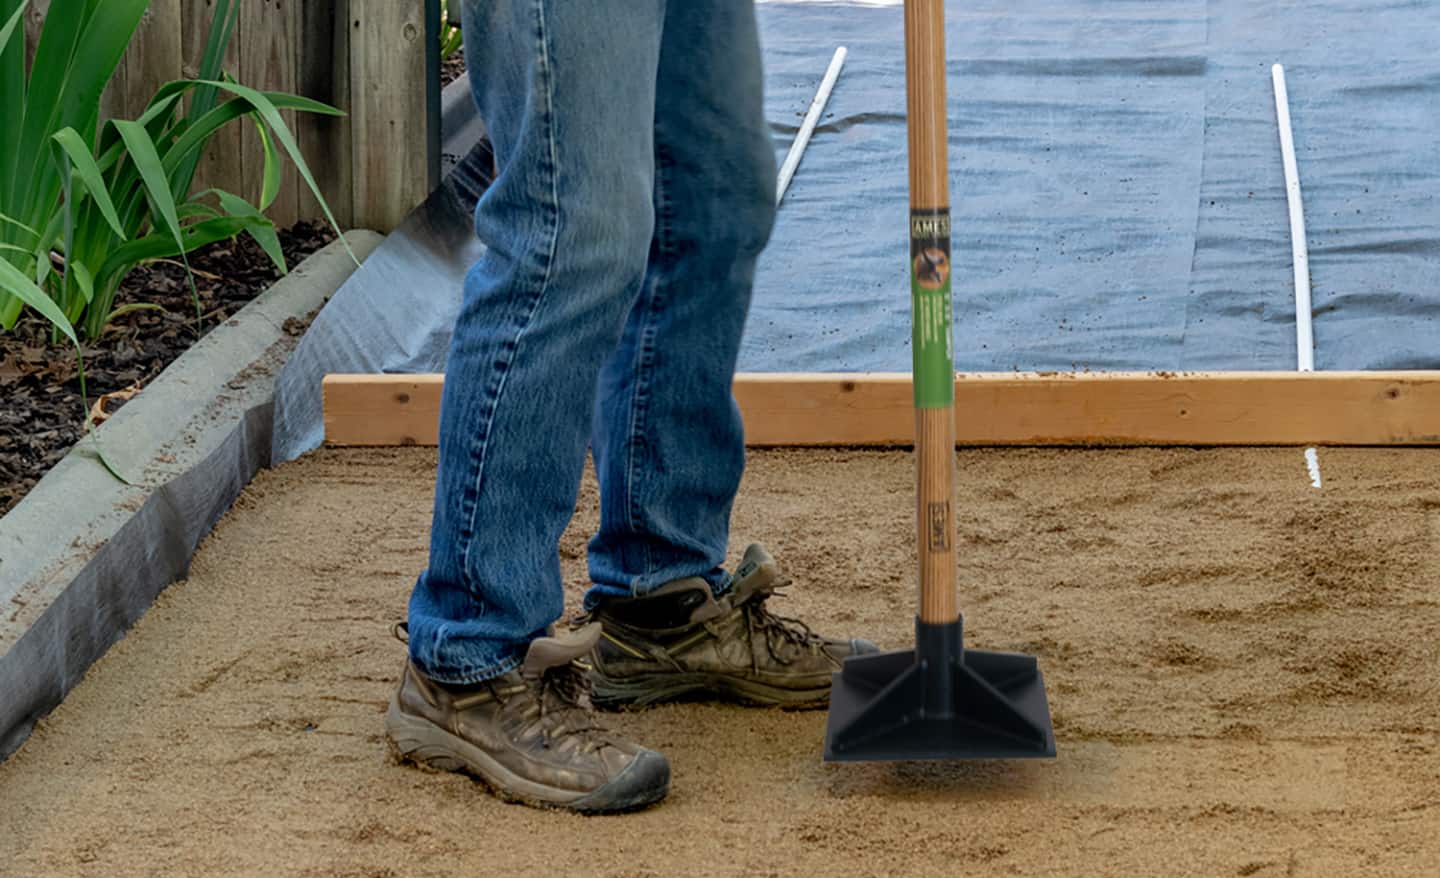 A person tamps gravel with a tamper.